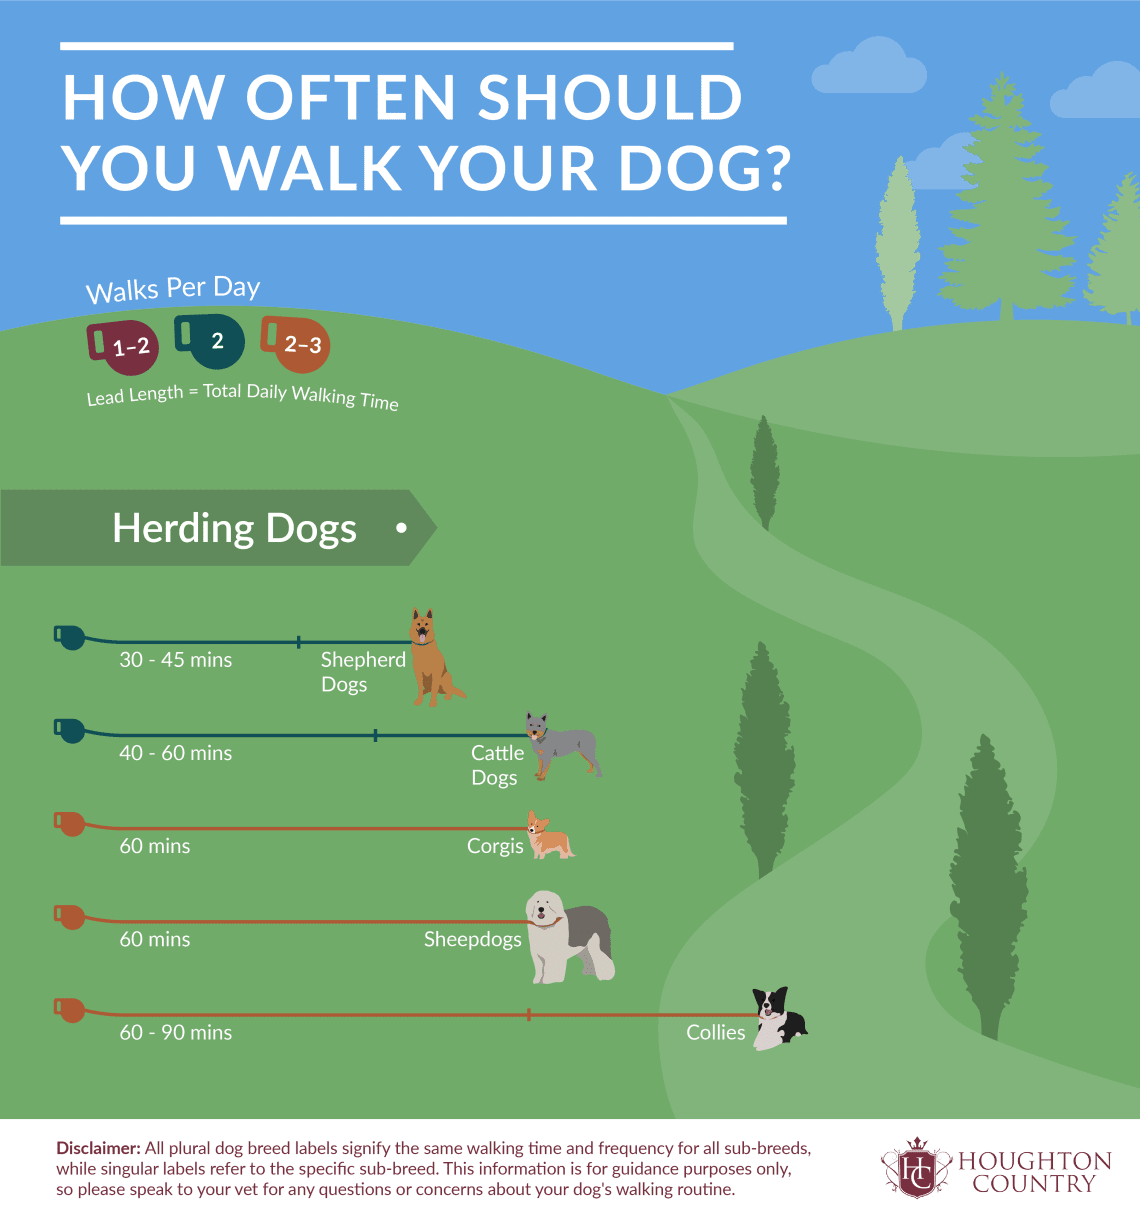 How often and how much to walk the dog